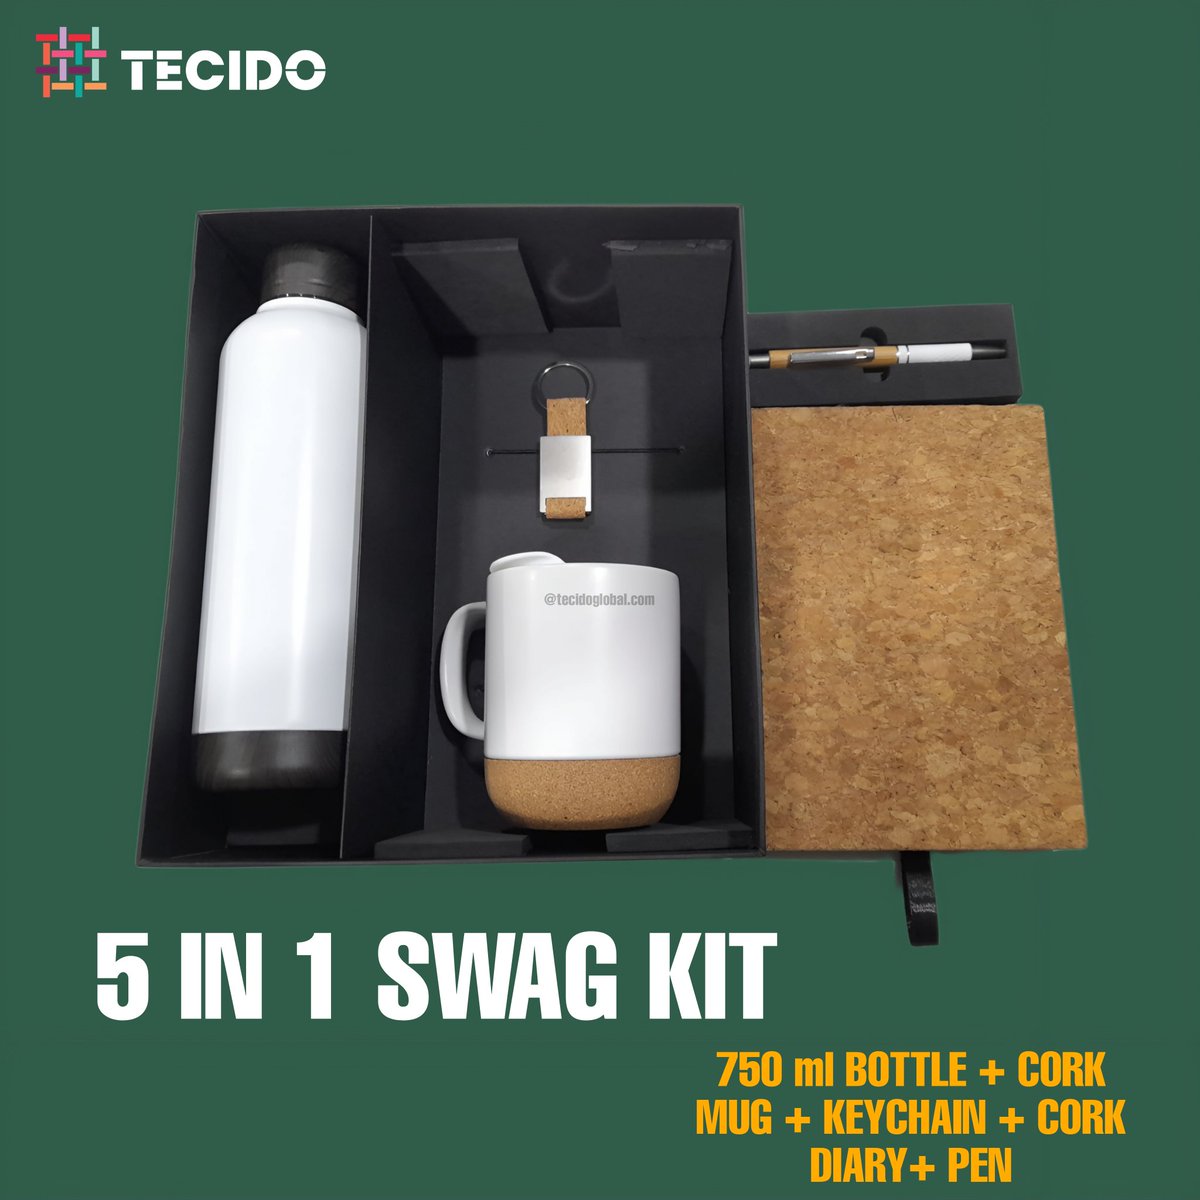 Unleash the Swag with our 5-in-1 Kit! 🎁 all in style! 

#corporategifting #employeeappreciation #employeeengagement #employeebenefits #brandedgifts #SwagKits #customization #teambuilding #SwagKit #Essentials #MustHaves #StayOrganized #SleekDesign